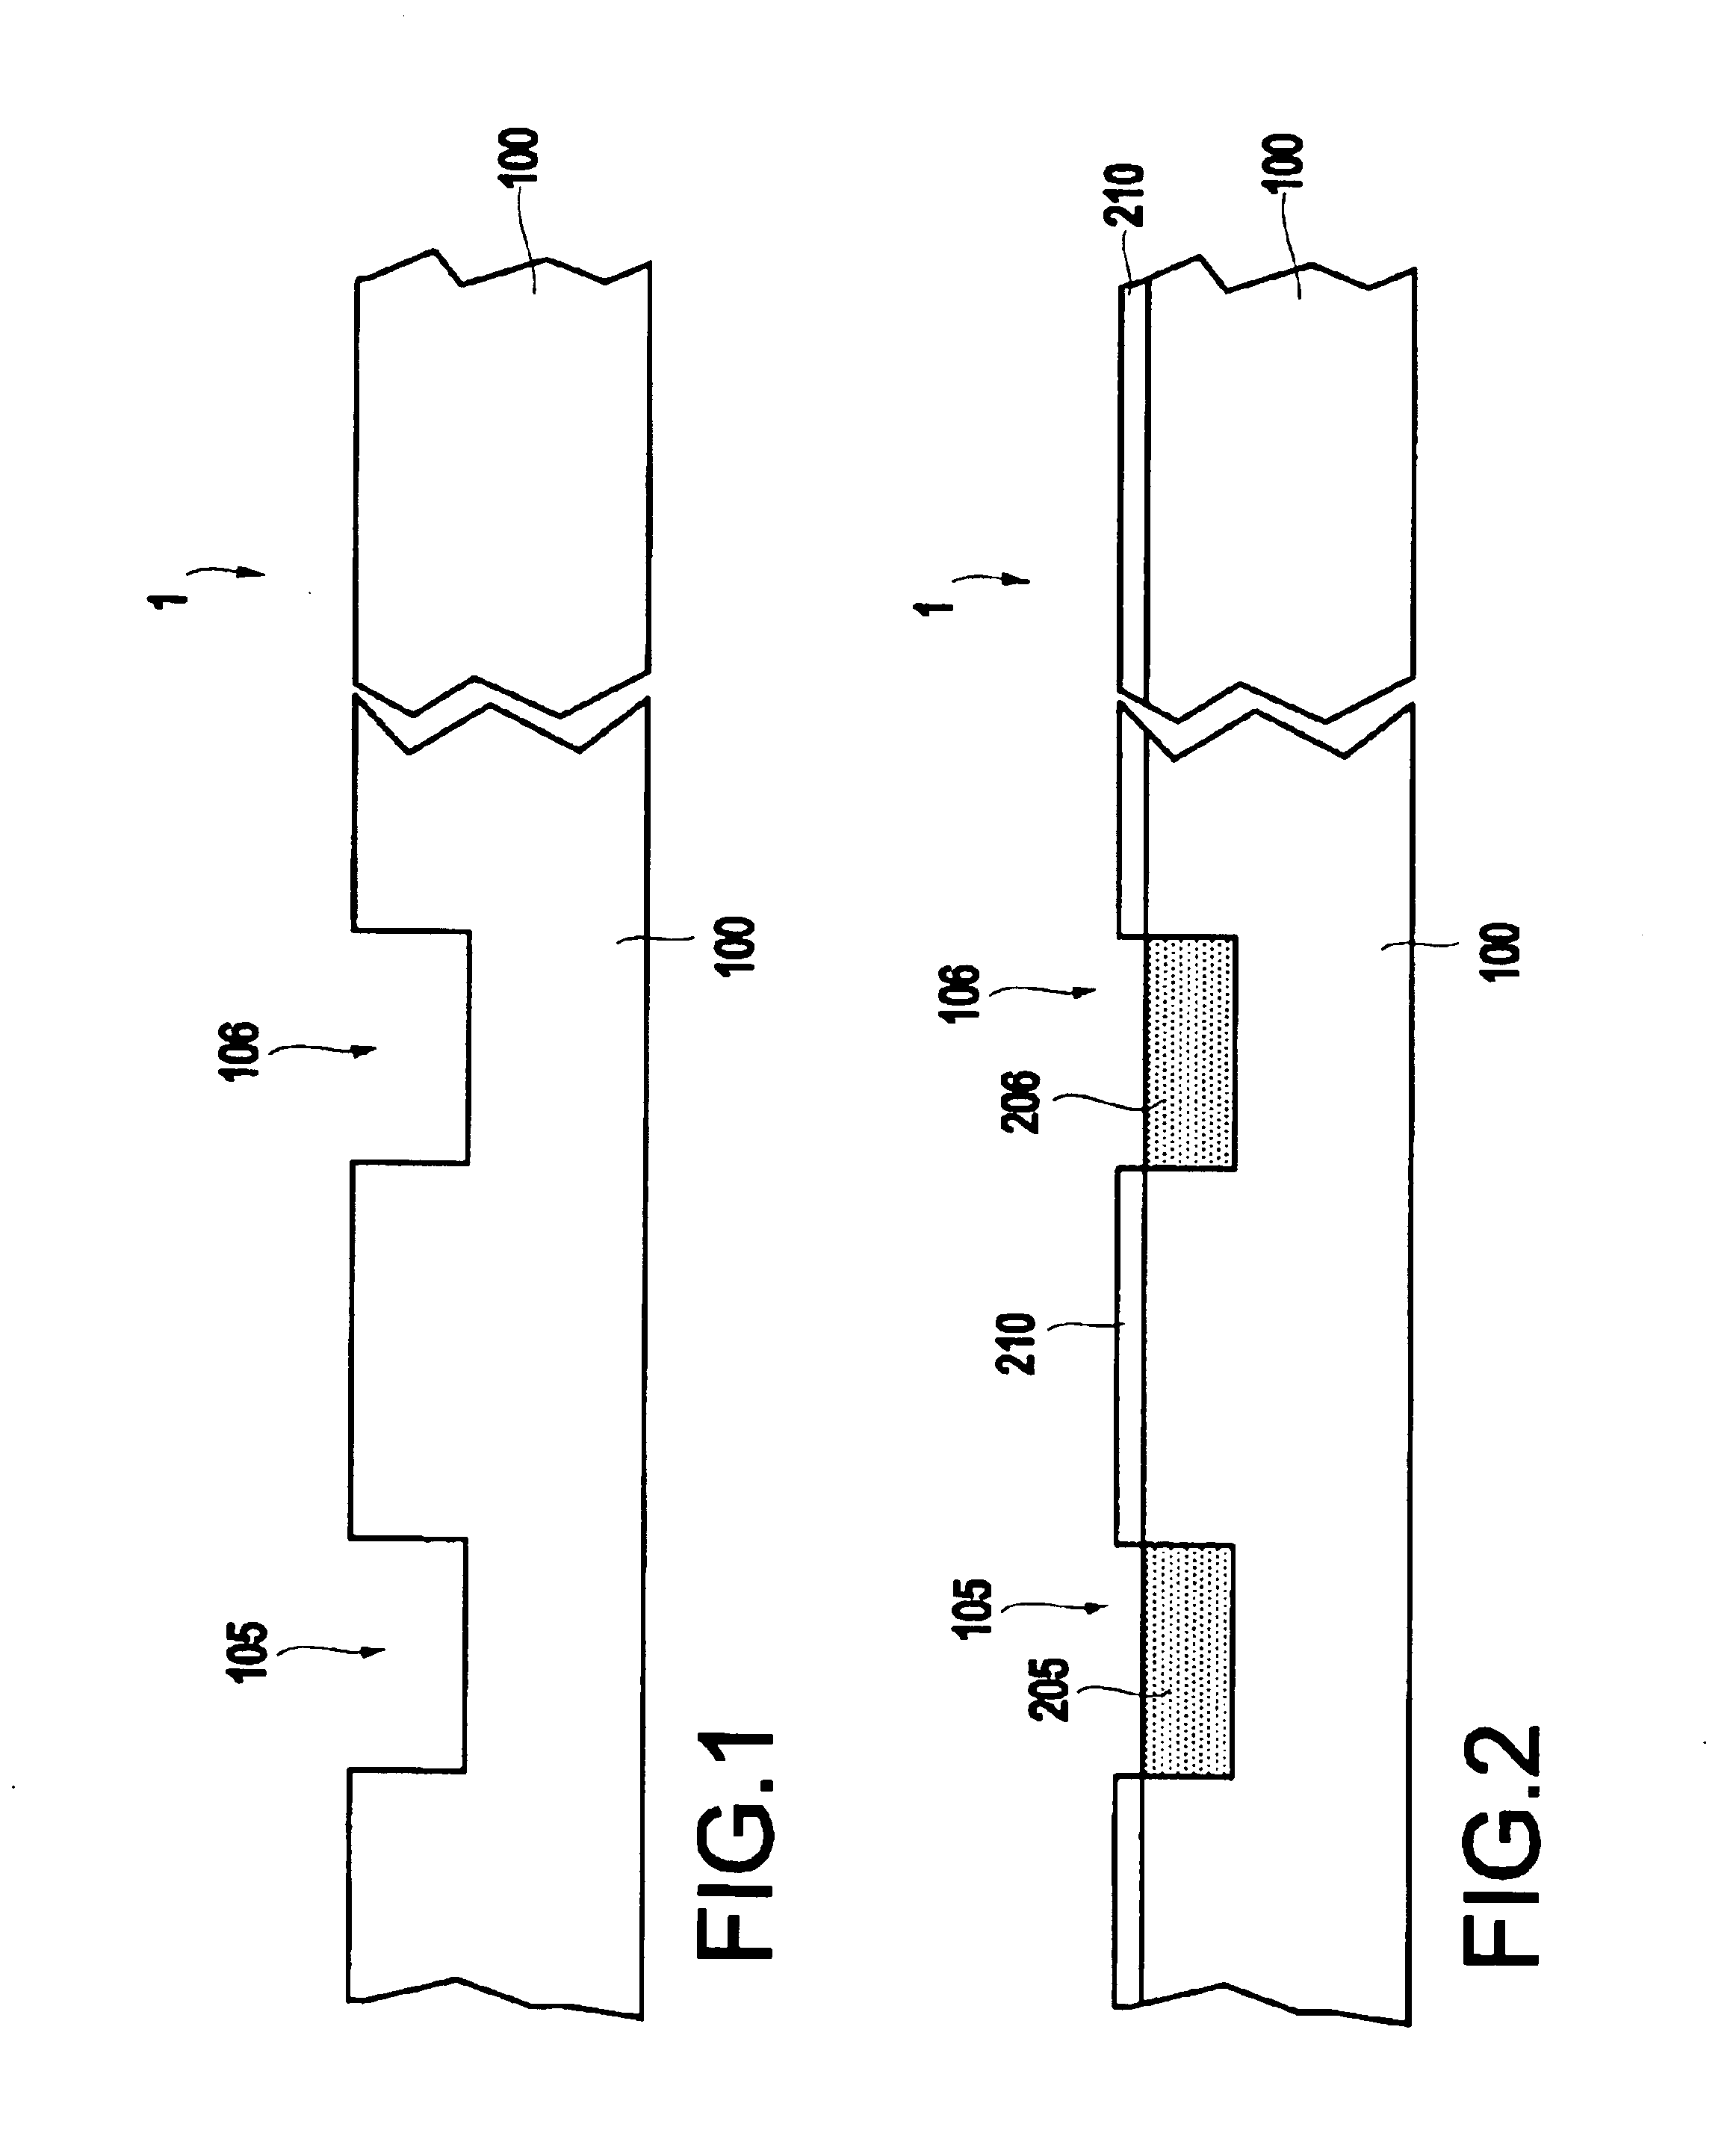 Semiconductor chip using both polysilicon and metal gate devices